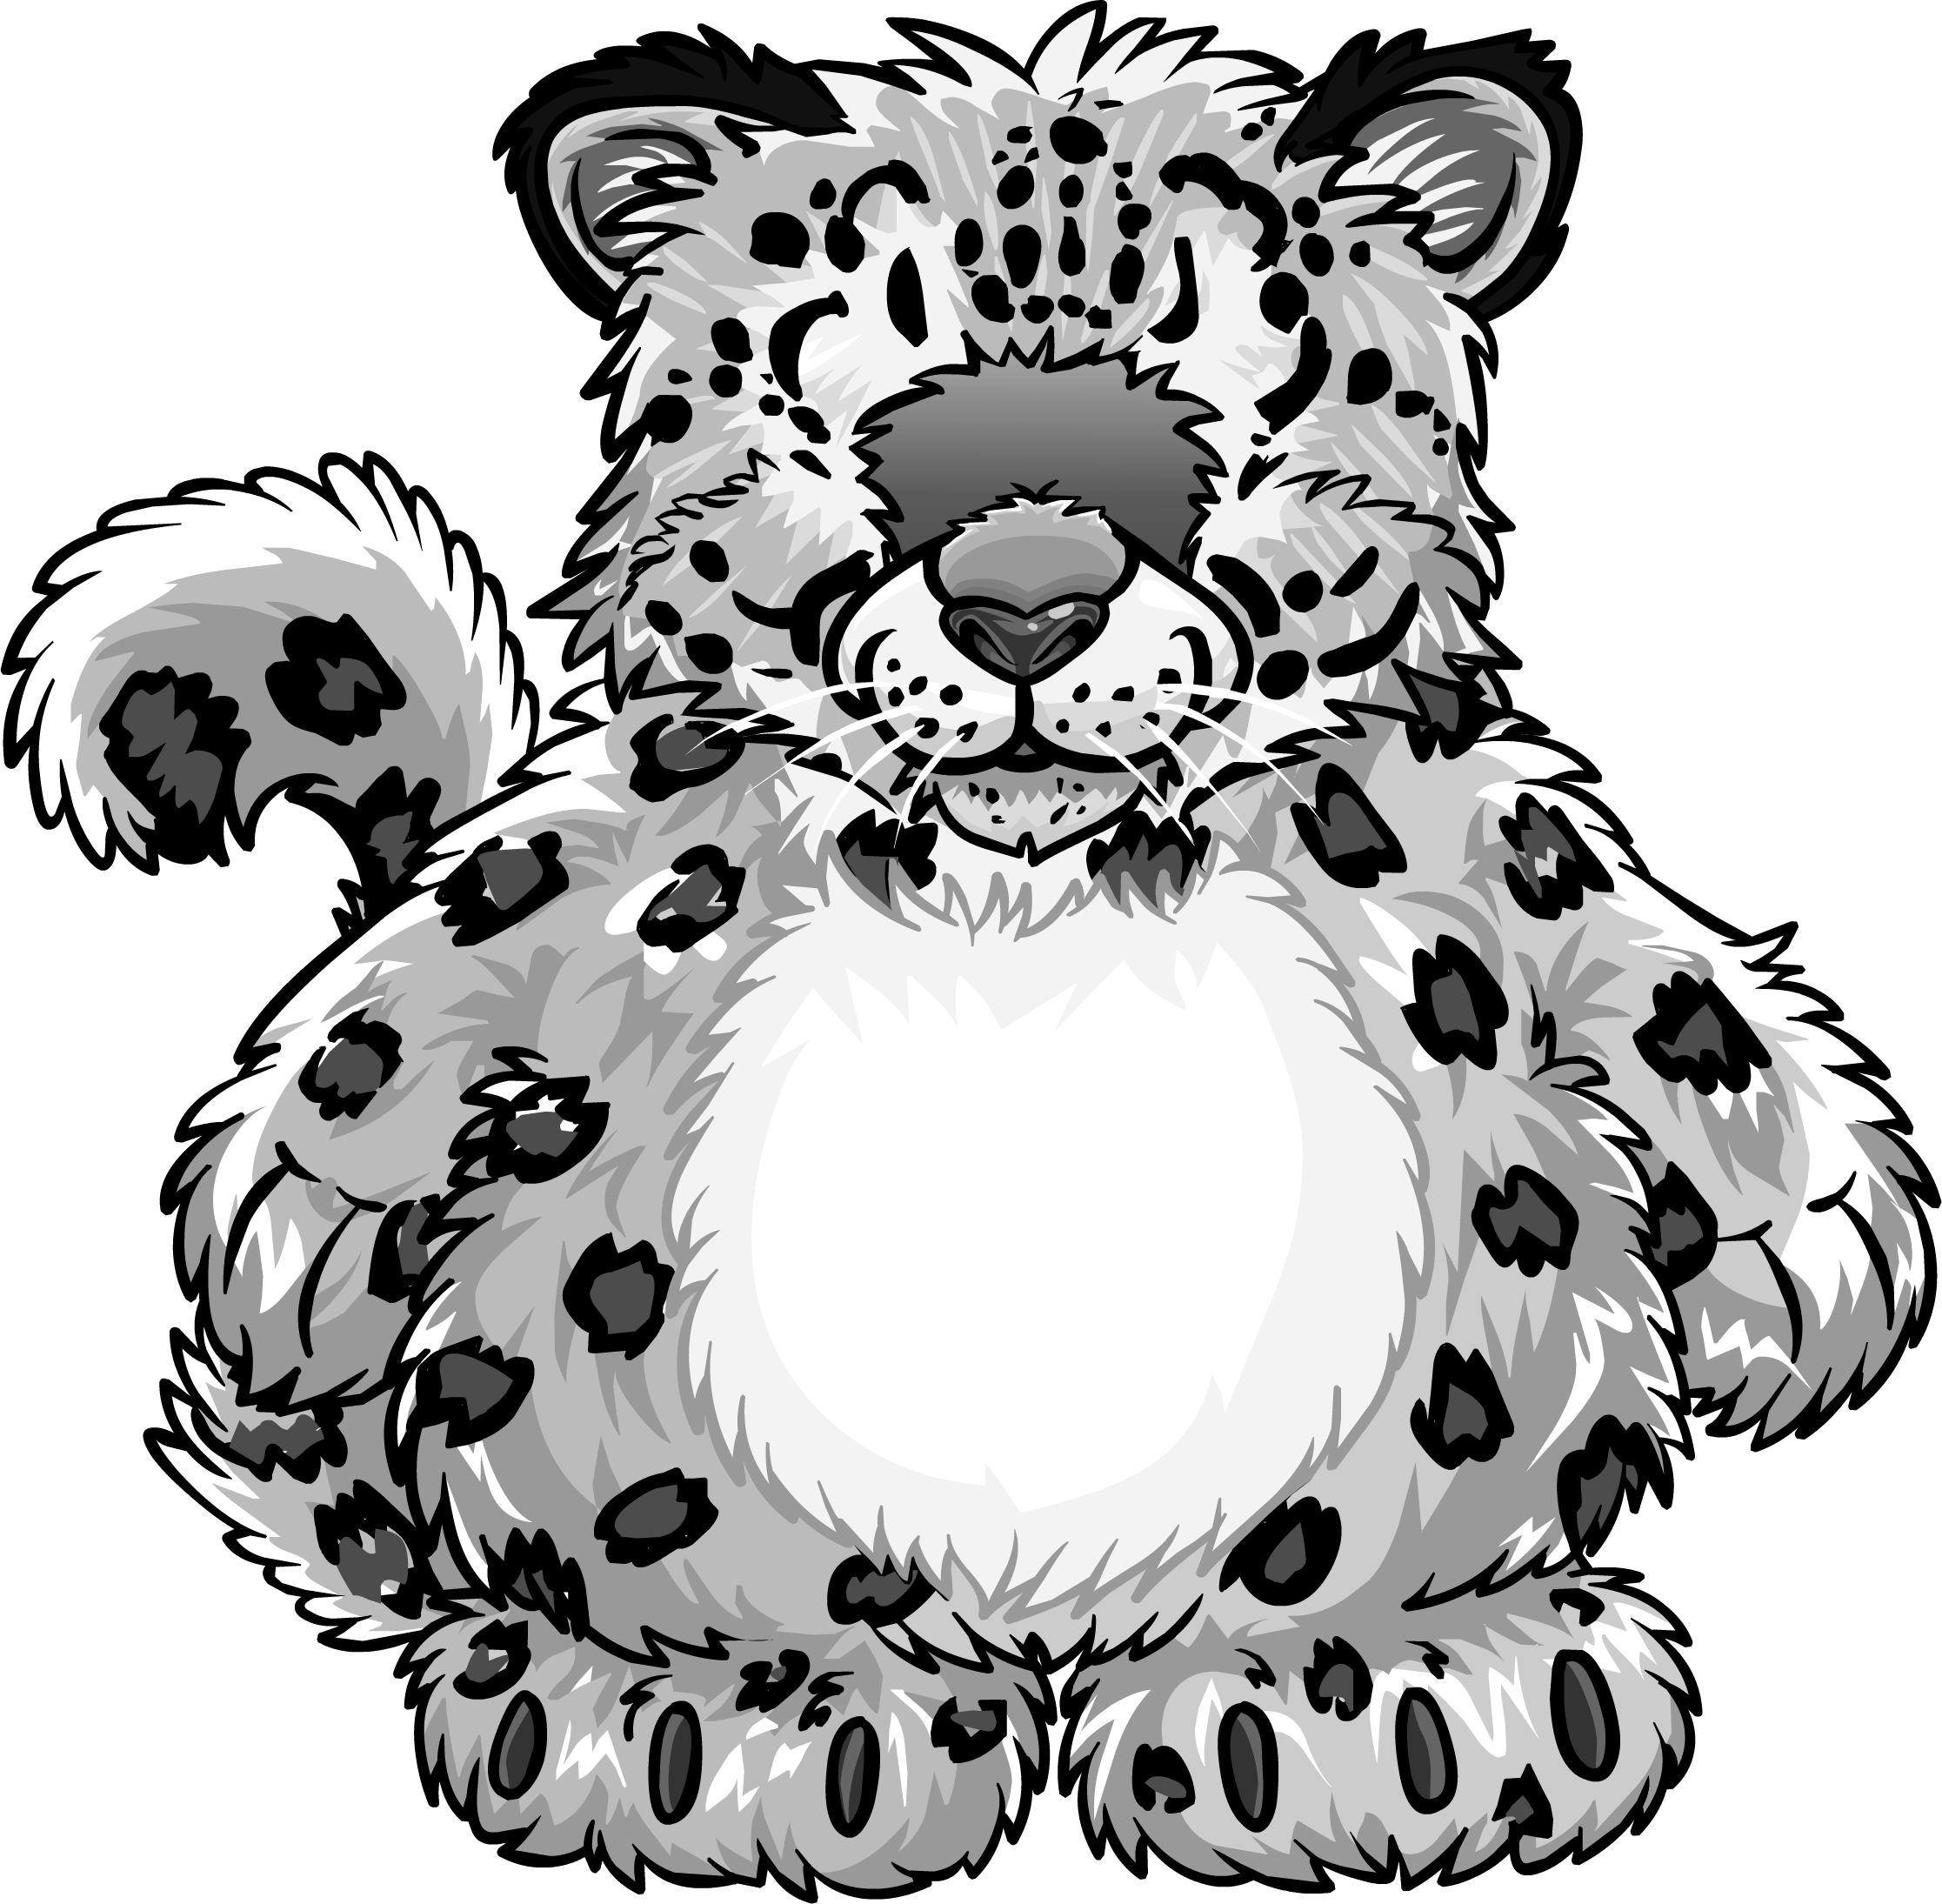 A Cartoon Of A White And Black Spotted Cat